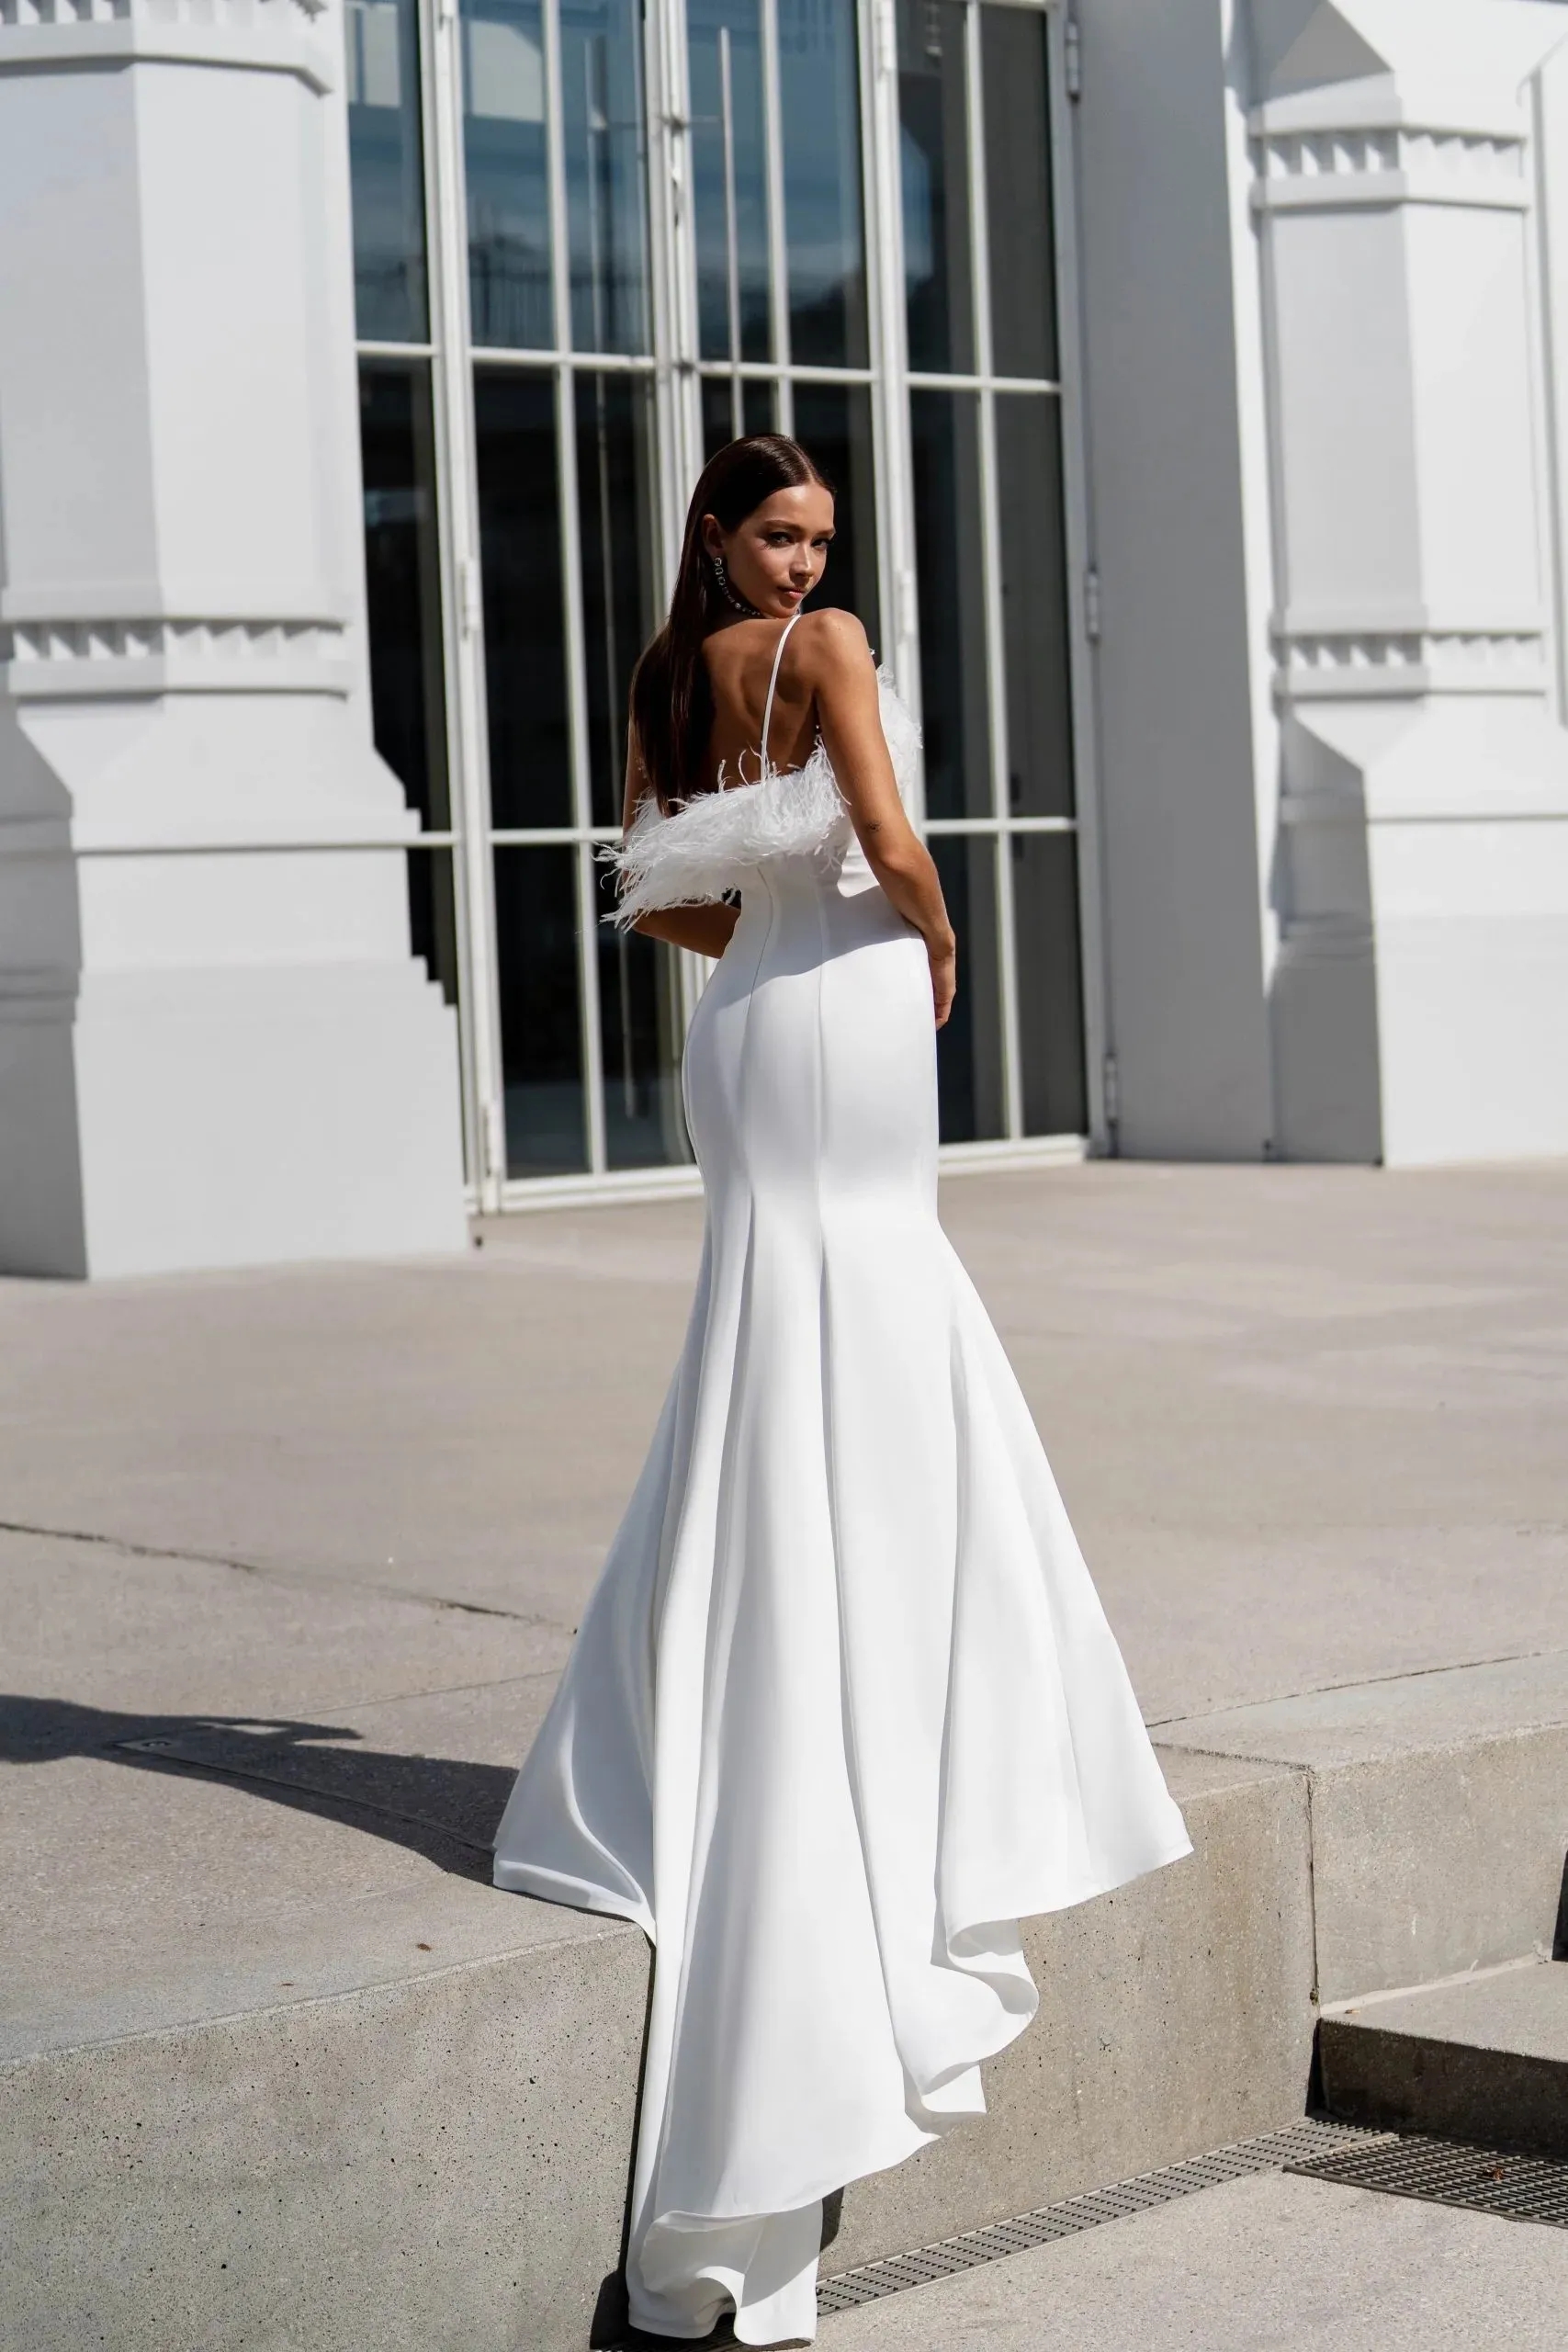 White Mermaid Wedding Dresses Sexy Spaghetti Straps Backless Bridal Gowns Elegant Sweep Train Party Dress Robes de Mariee YD